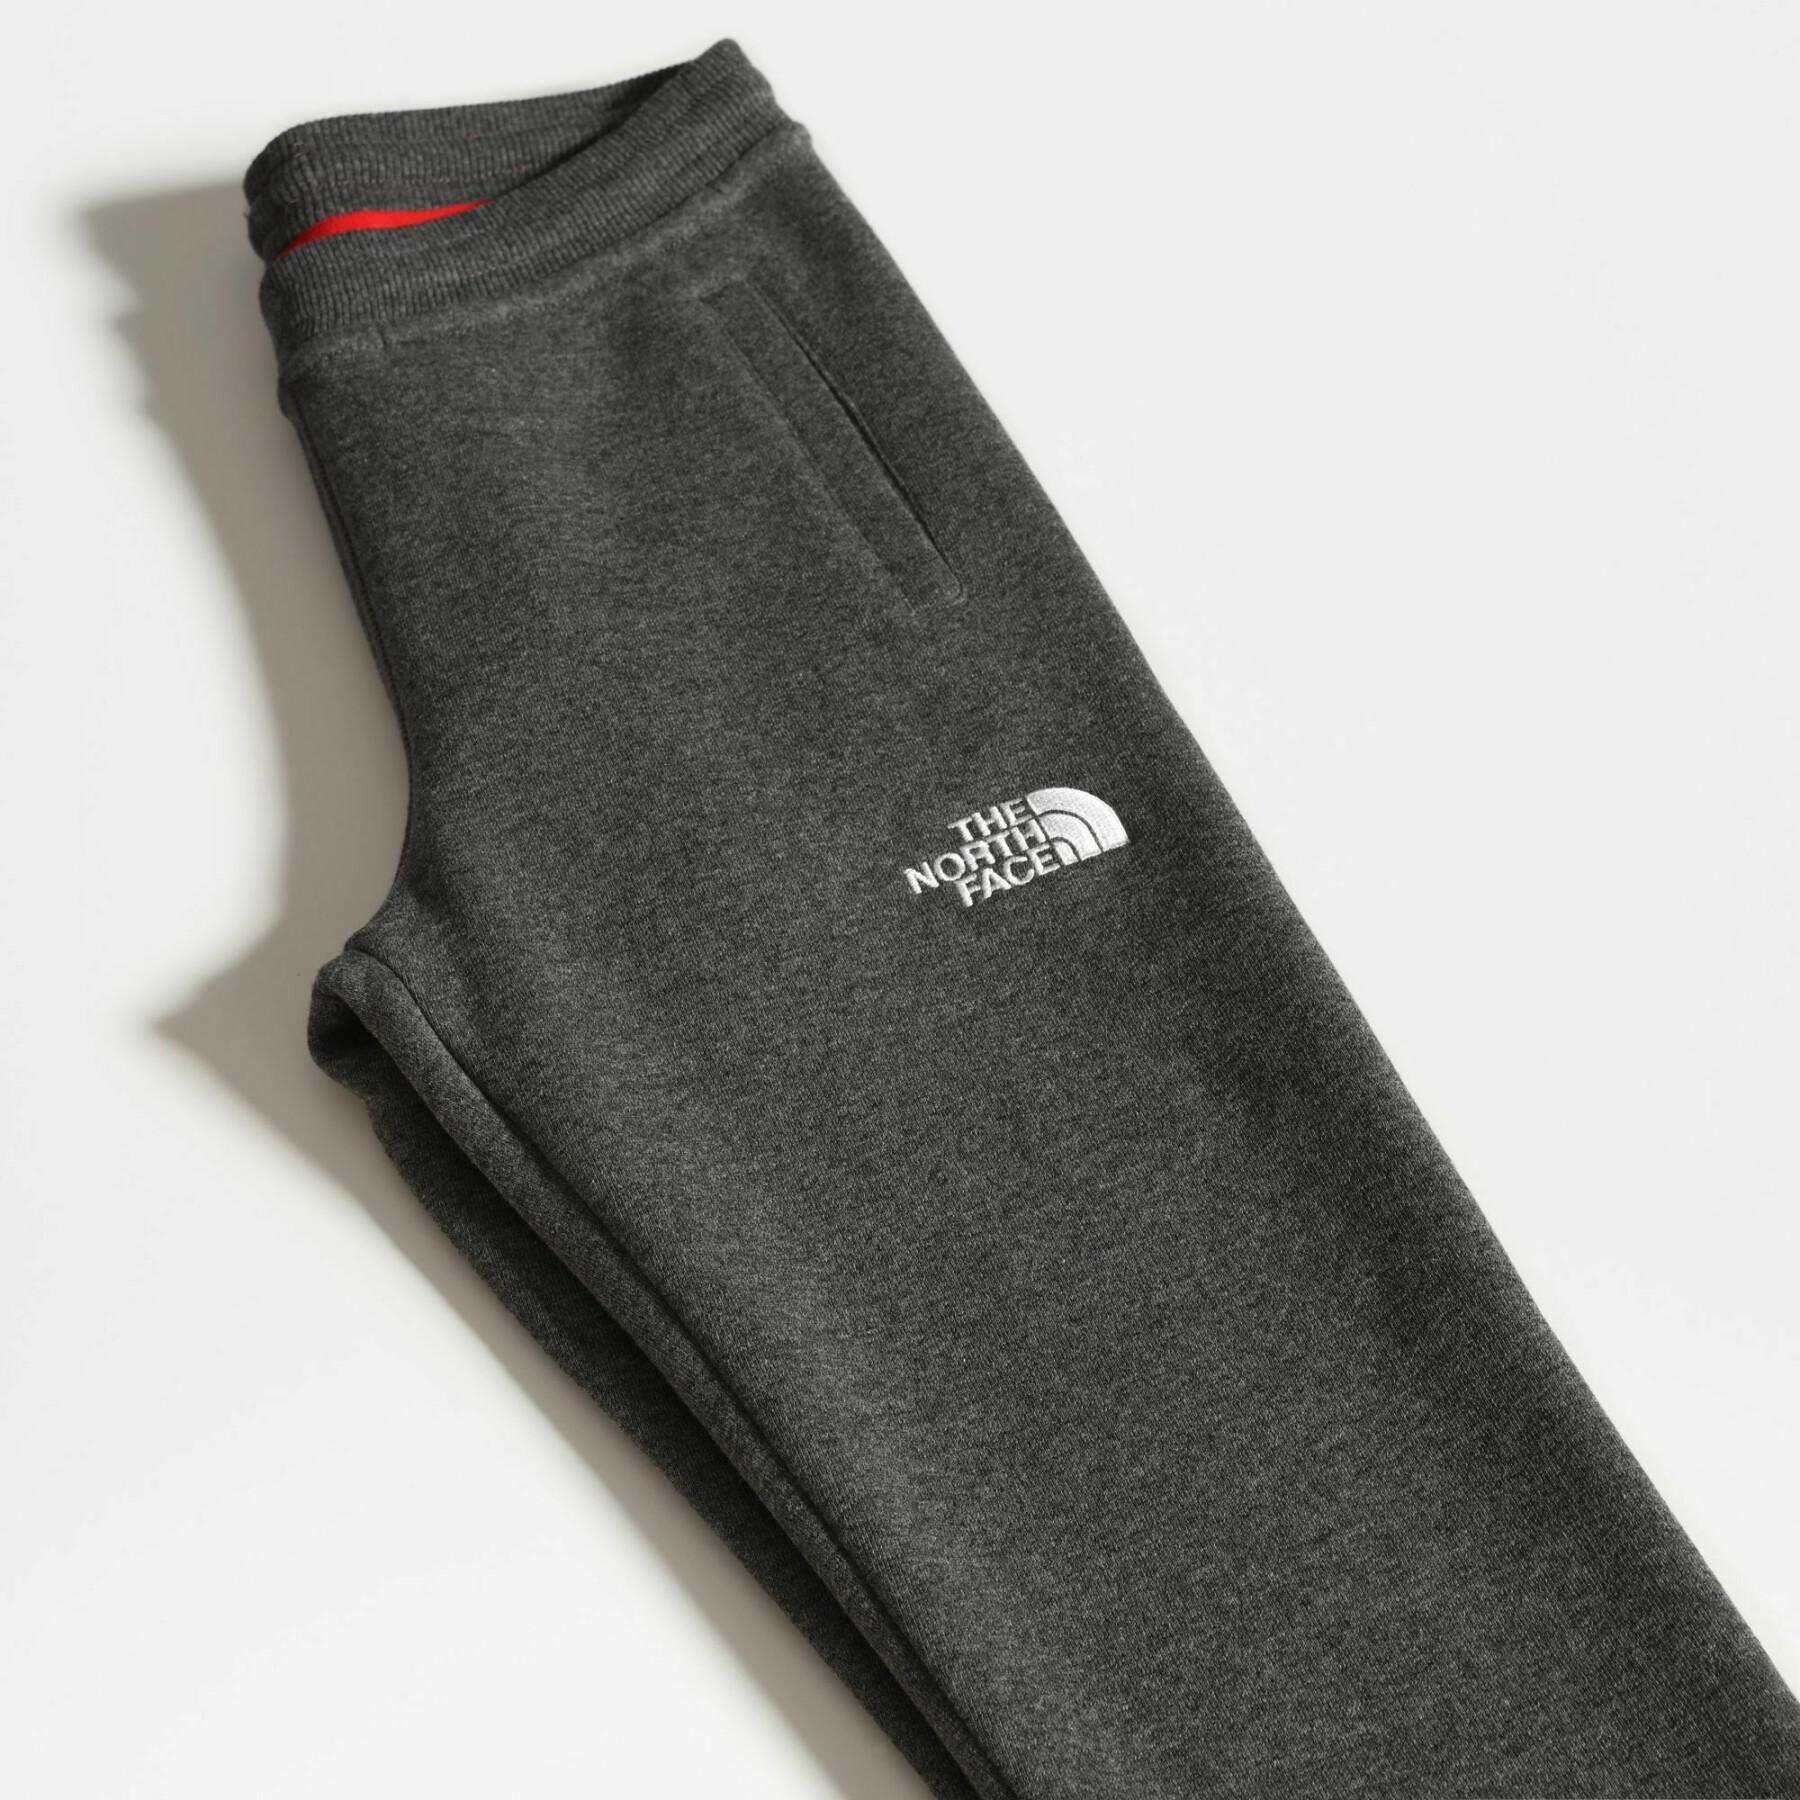 Children's trousers The North Face Polaire